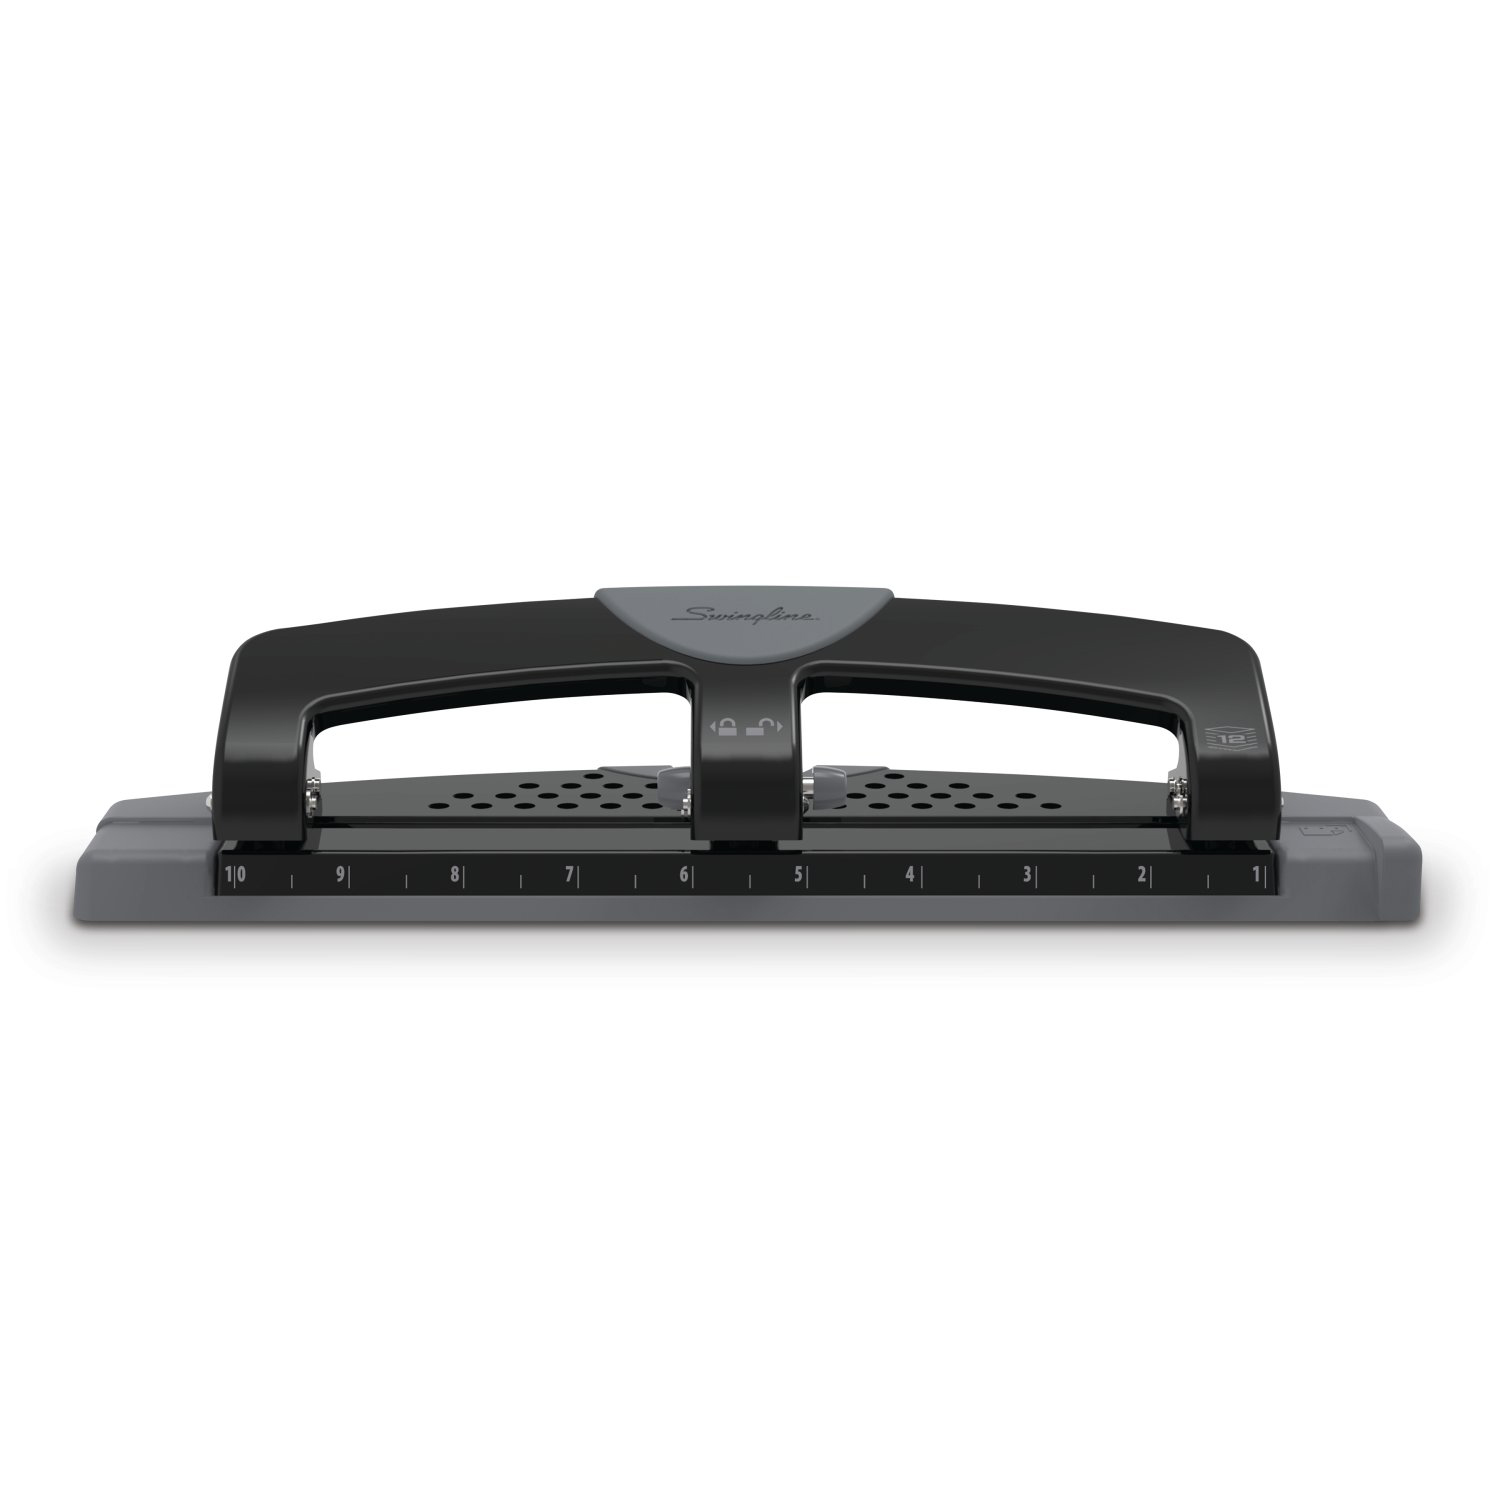 3-Hole Punch, 20 Sheets, Silver/Black